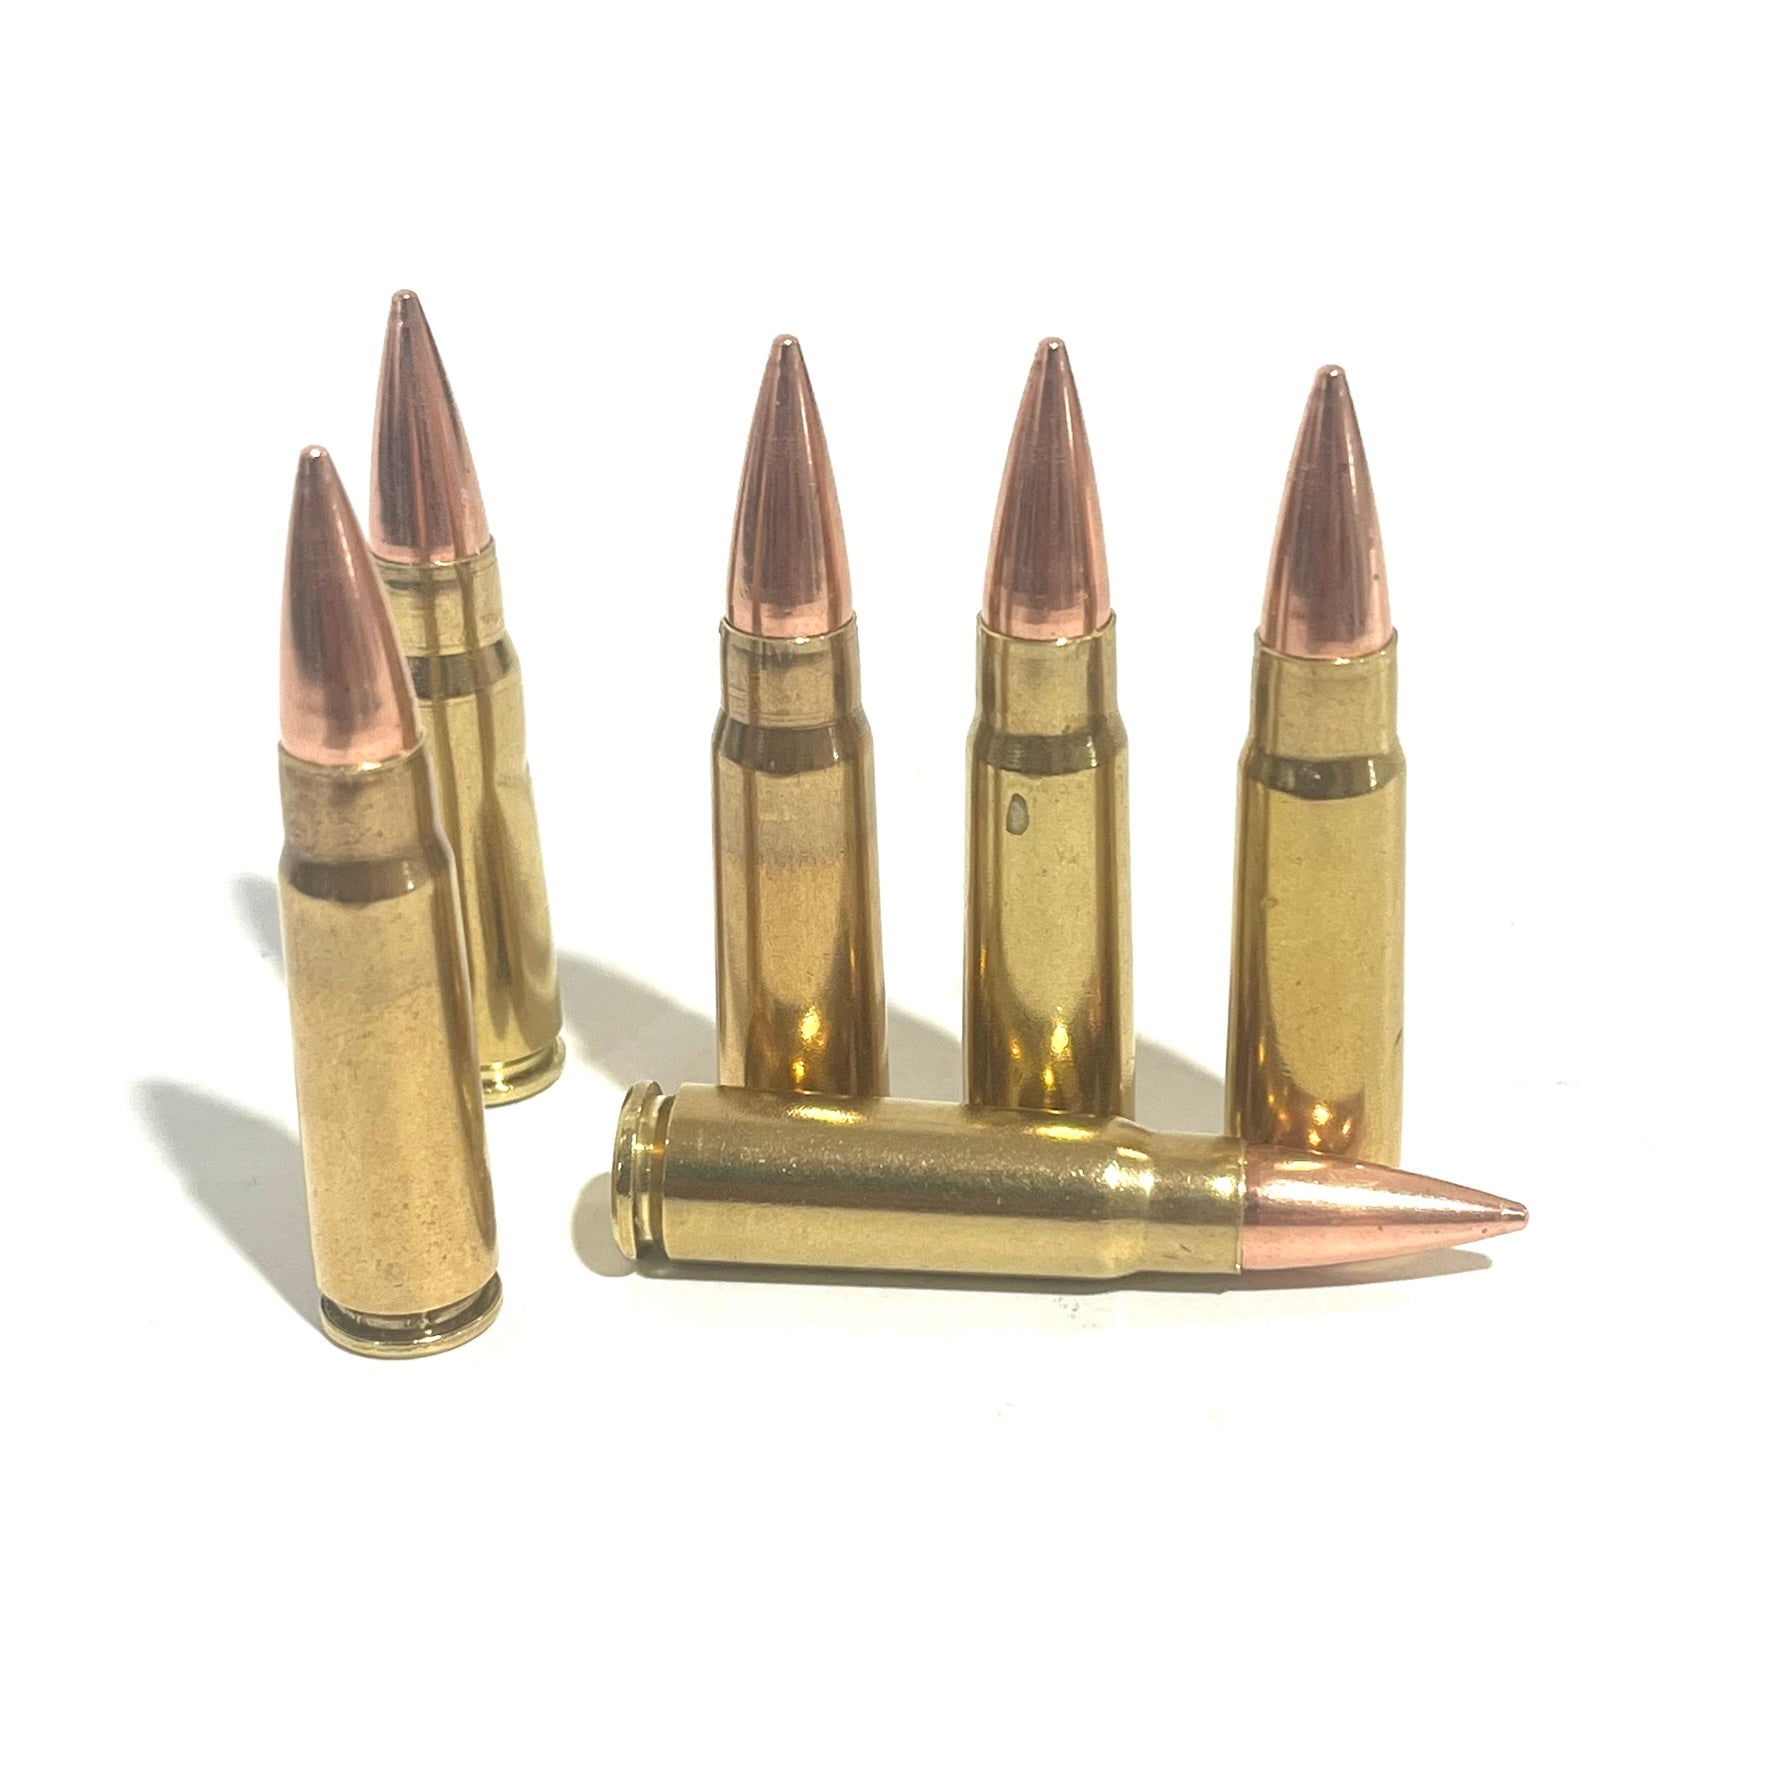 fake bullets « THE FRUGAL MATERIALIST